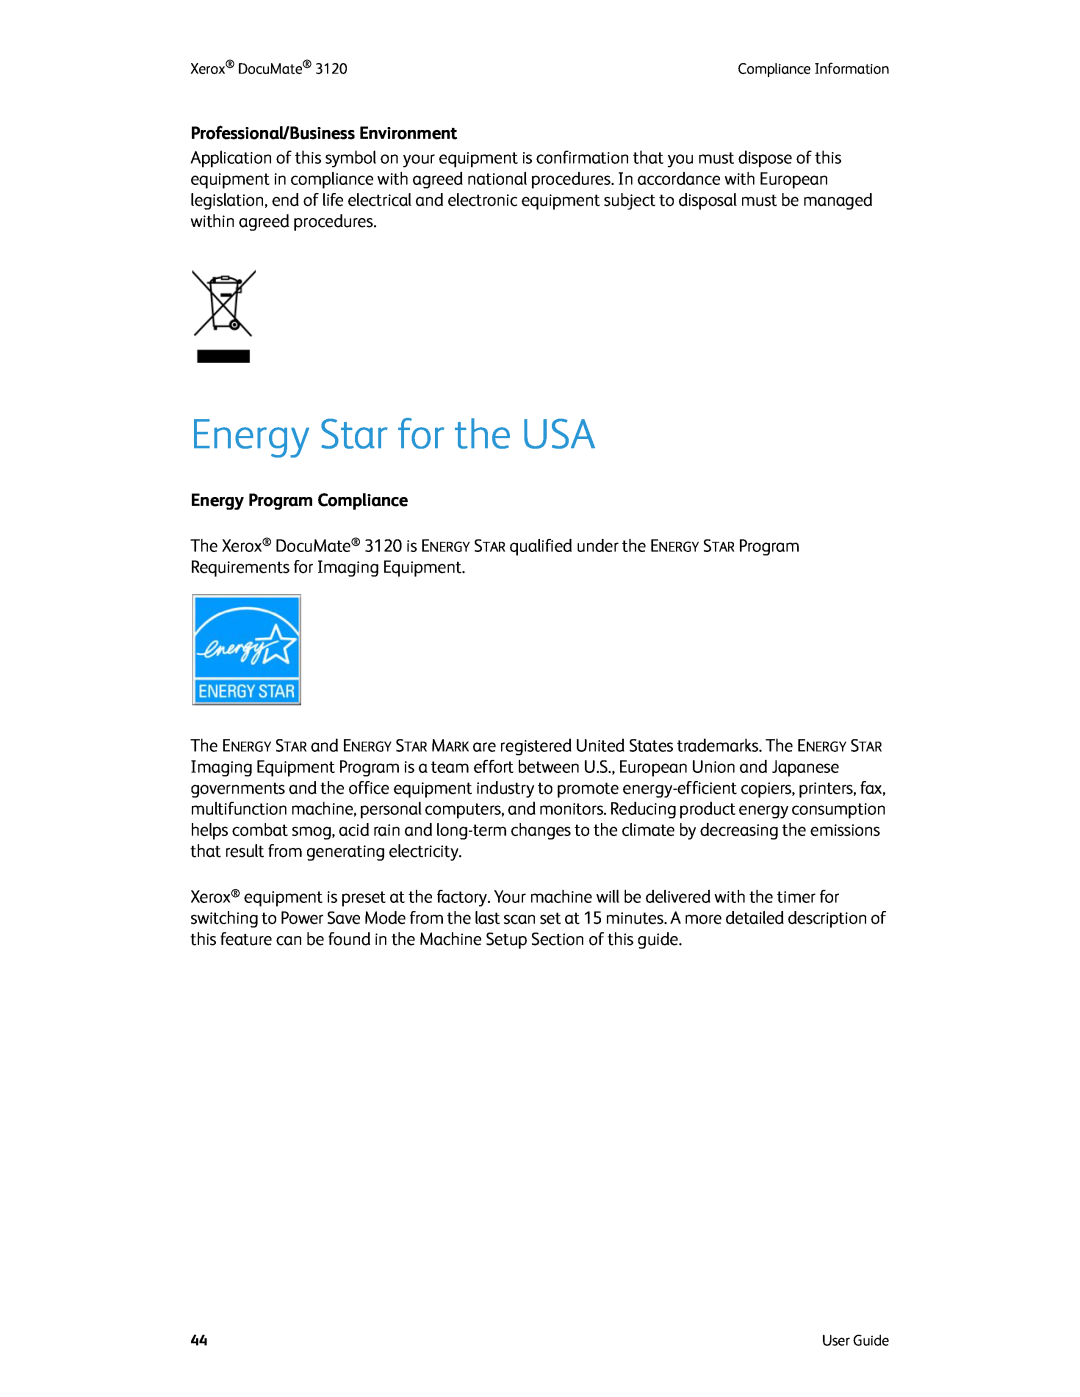 Xerox xerox manual Energy Star for the USA, Professional/Business Environment, Energy Program Compliance 